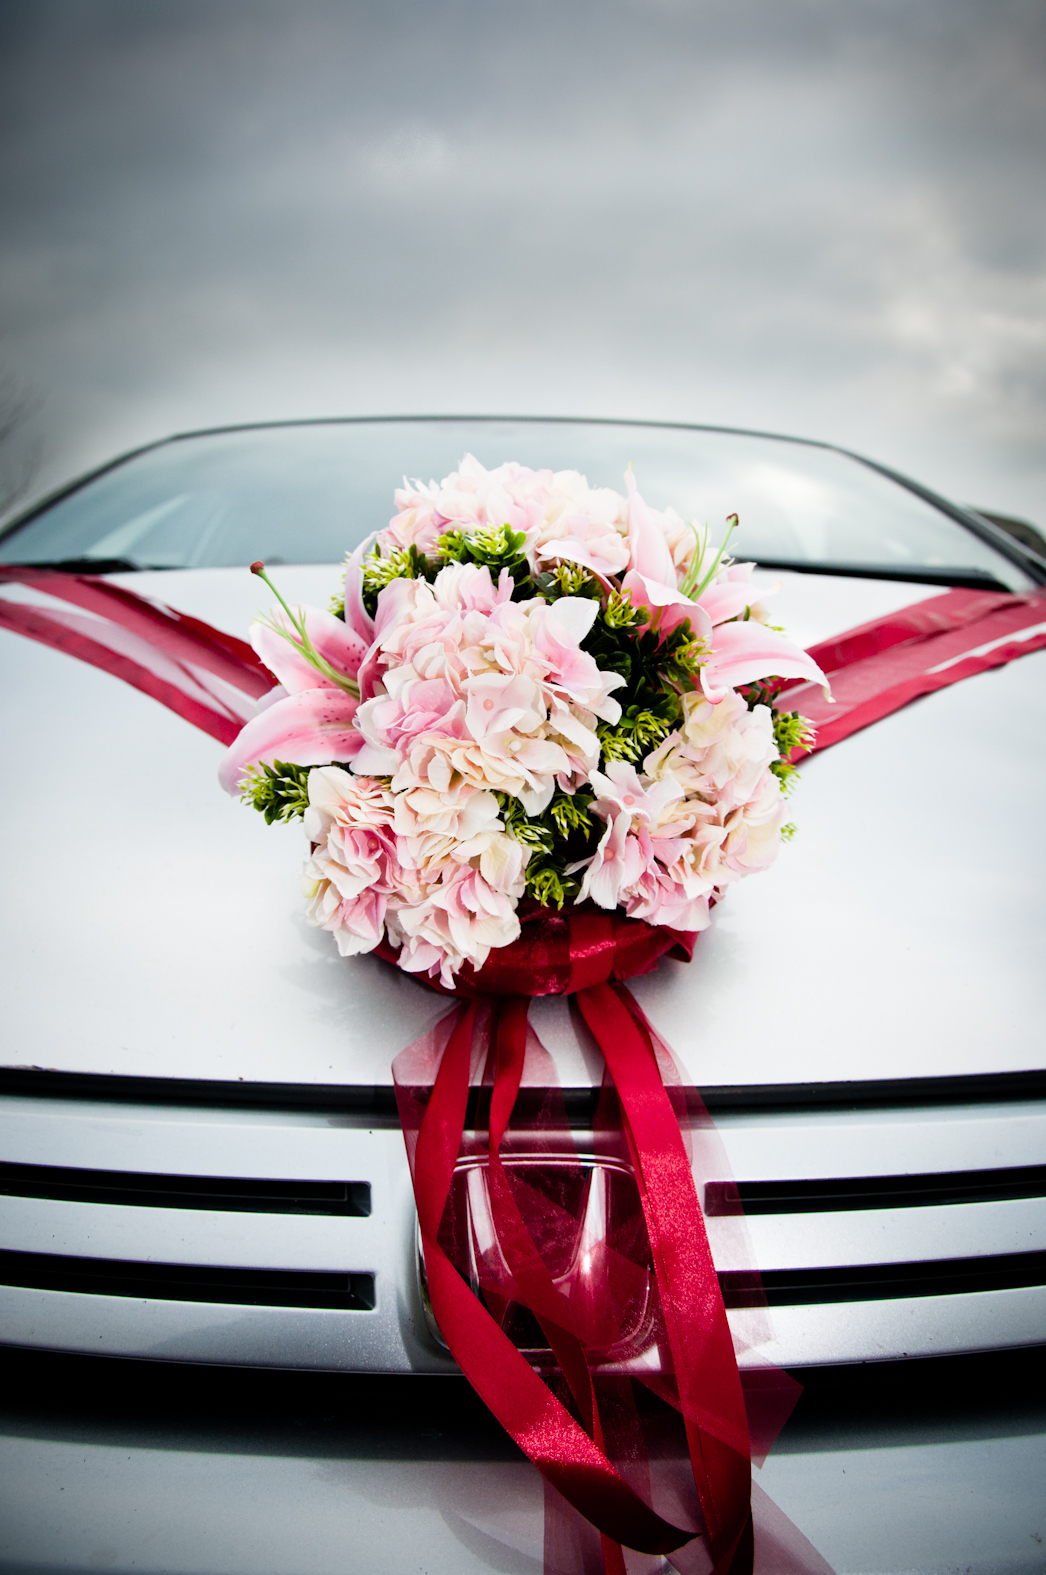 Wedding car decorated with flowers photo